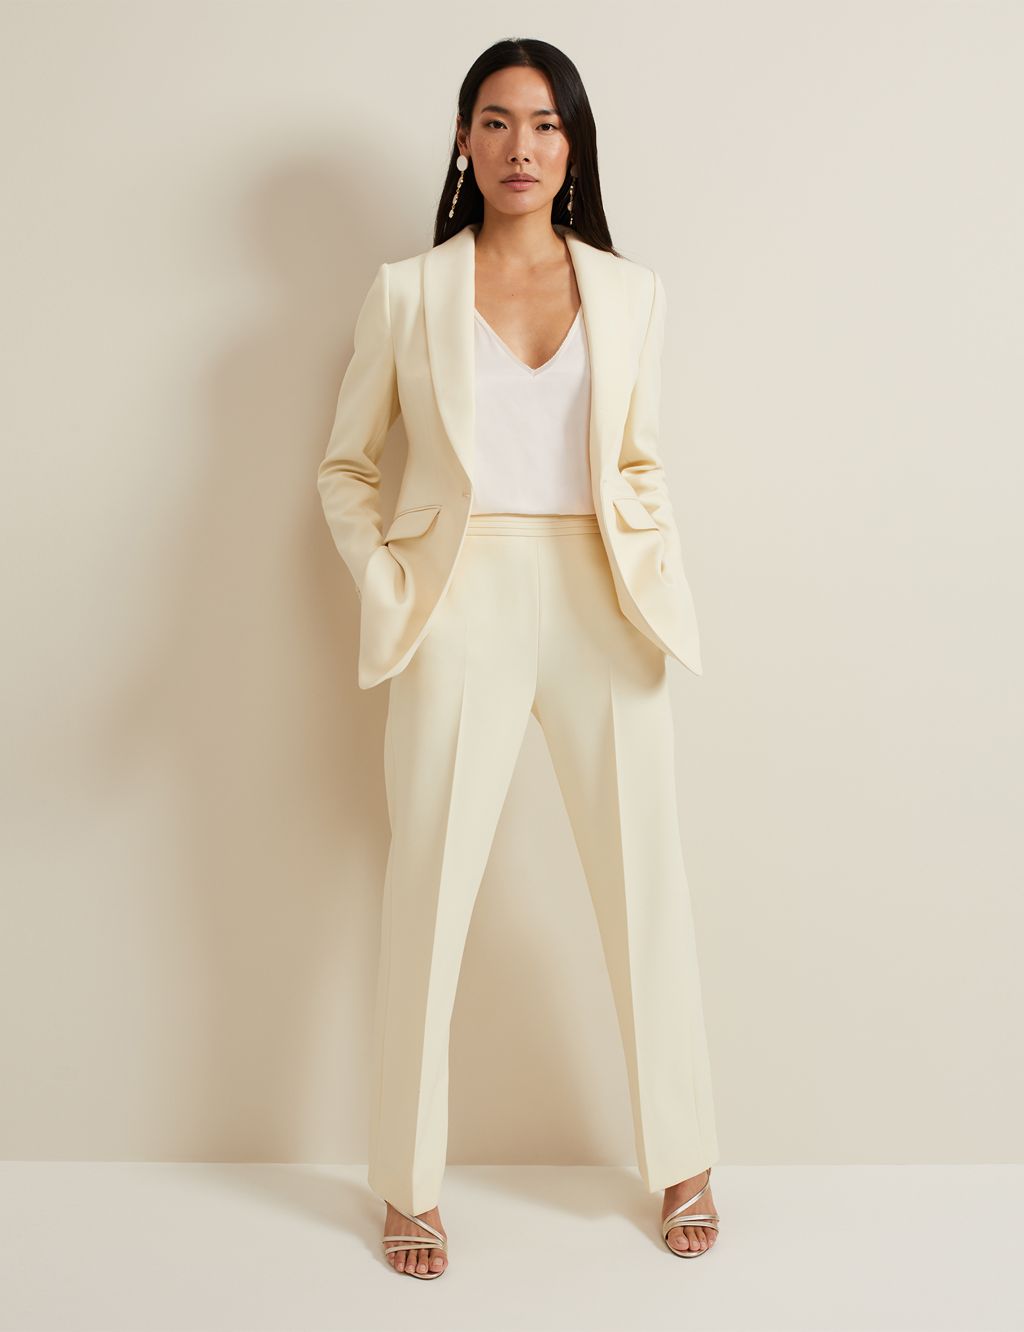 Pleat Front Tapered Trousers